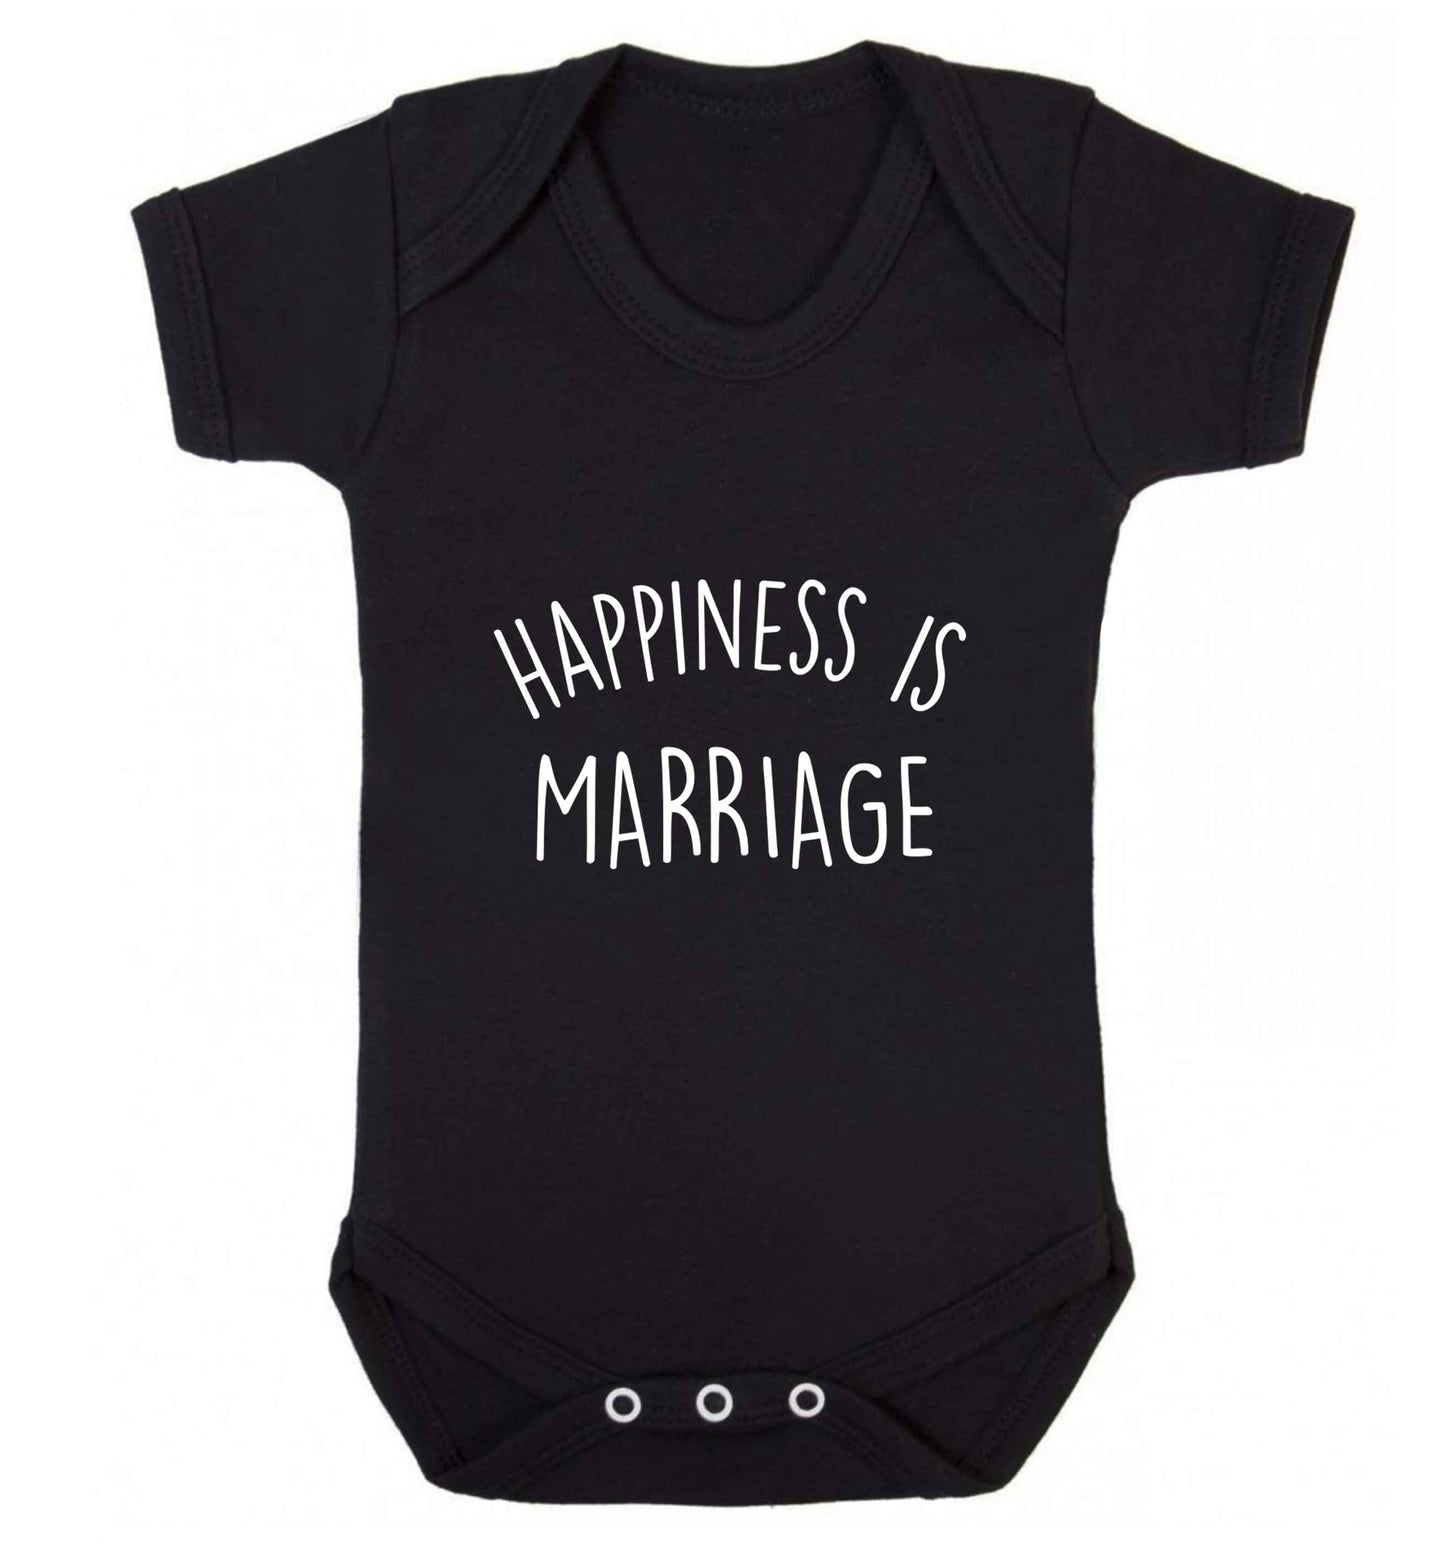 Happiness is wedding planning baby vest black 18-24 months